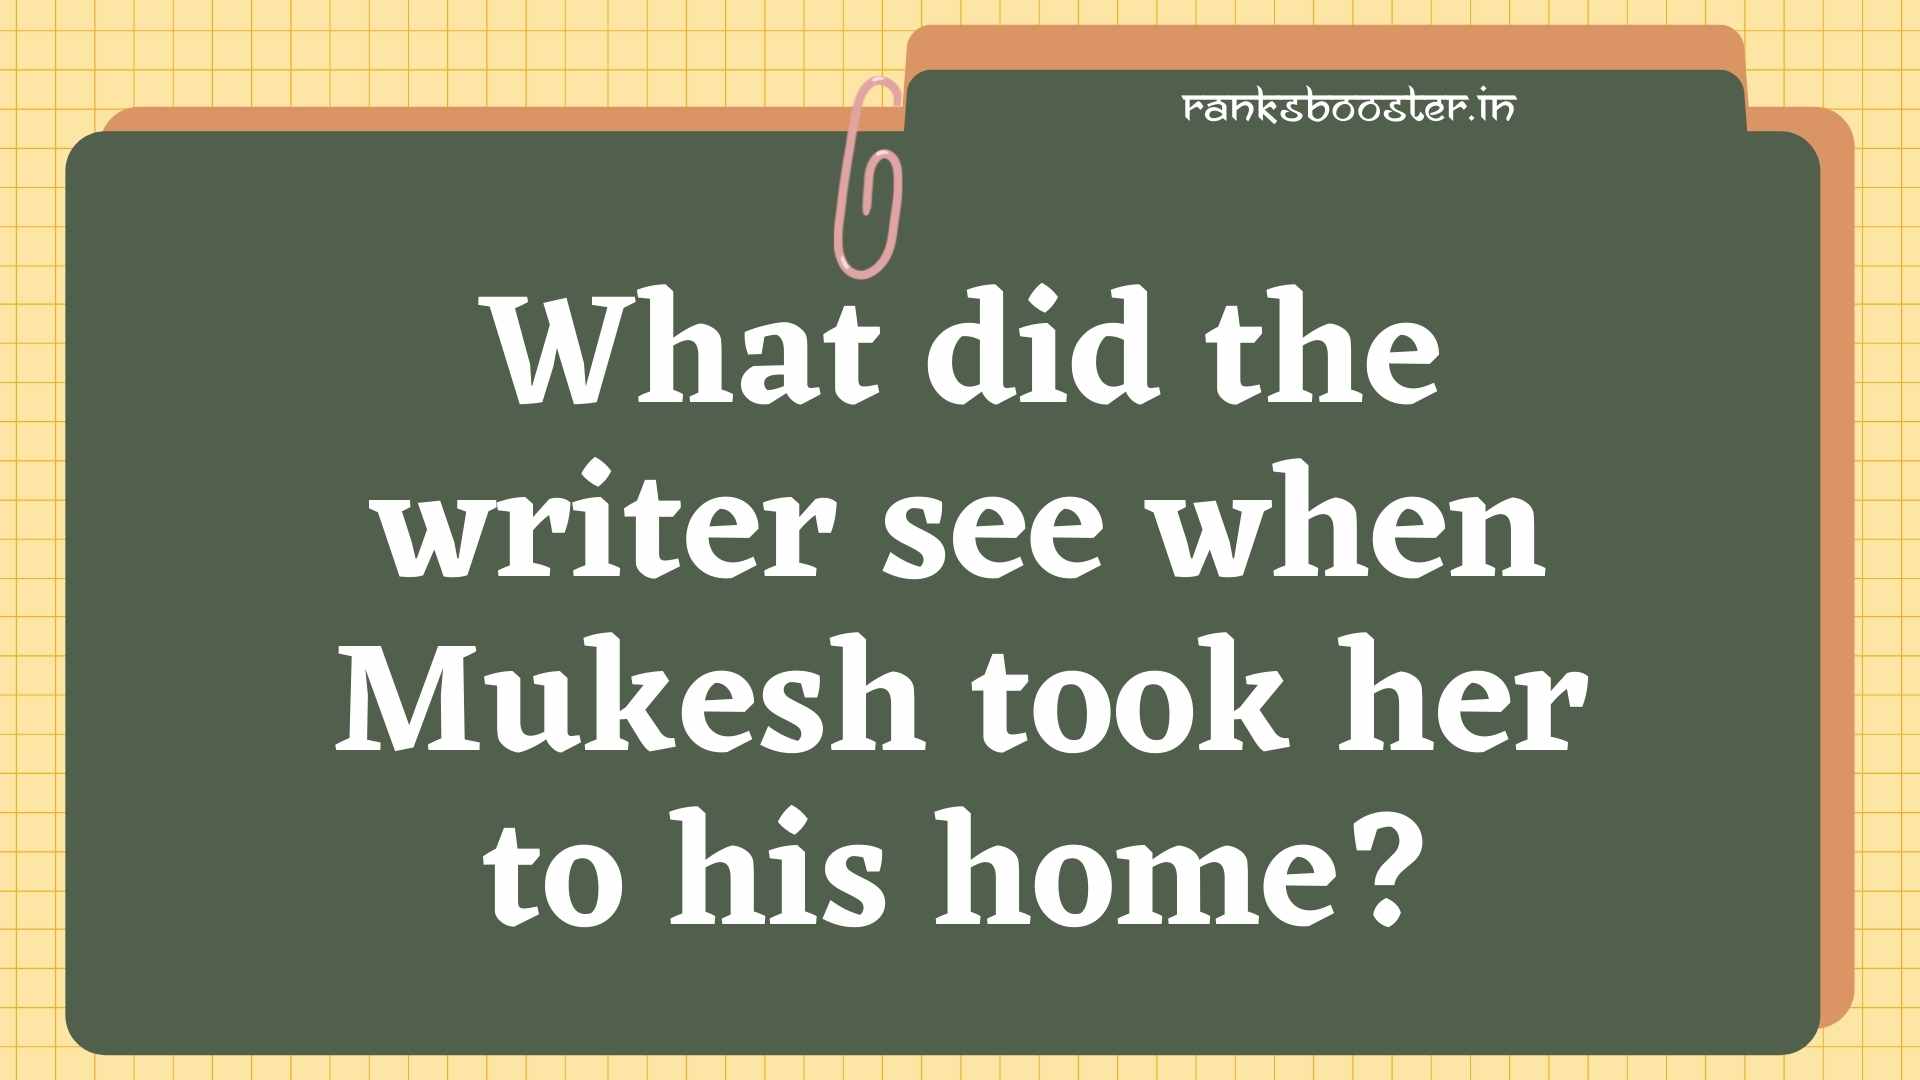 What did the writer see when Mukesh took her to his home?